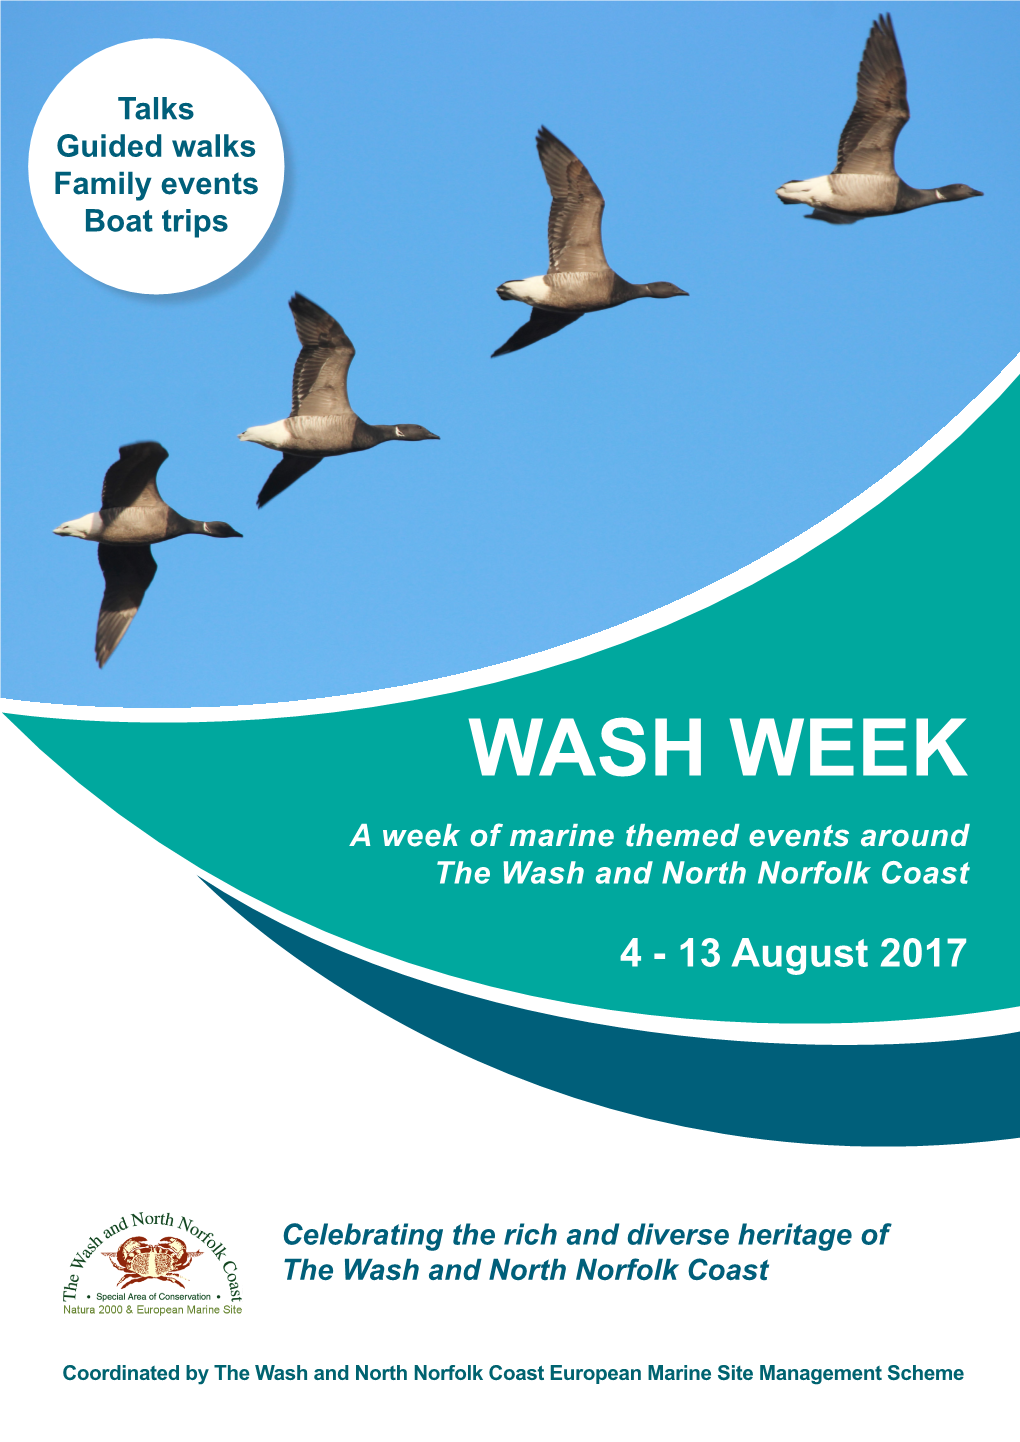 WASH WEEK a Week of Marine Themed Events Around the Wash and North Norfolk Coast